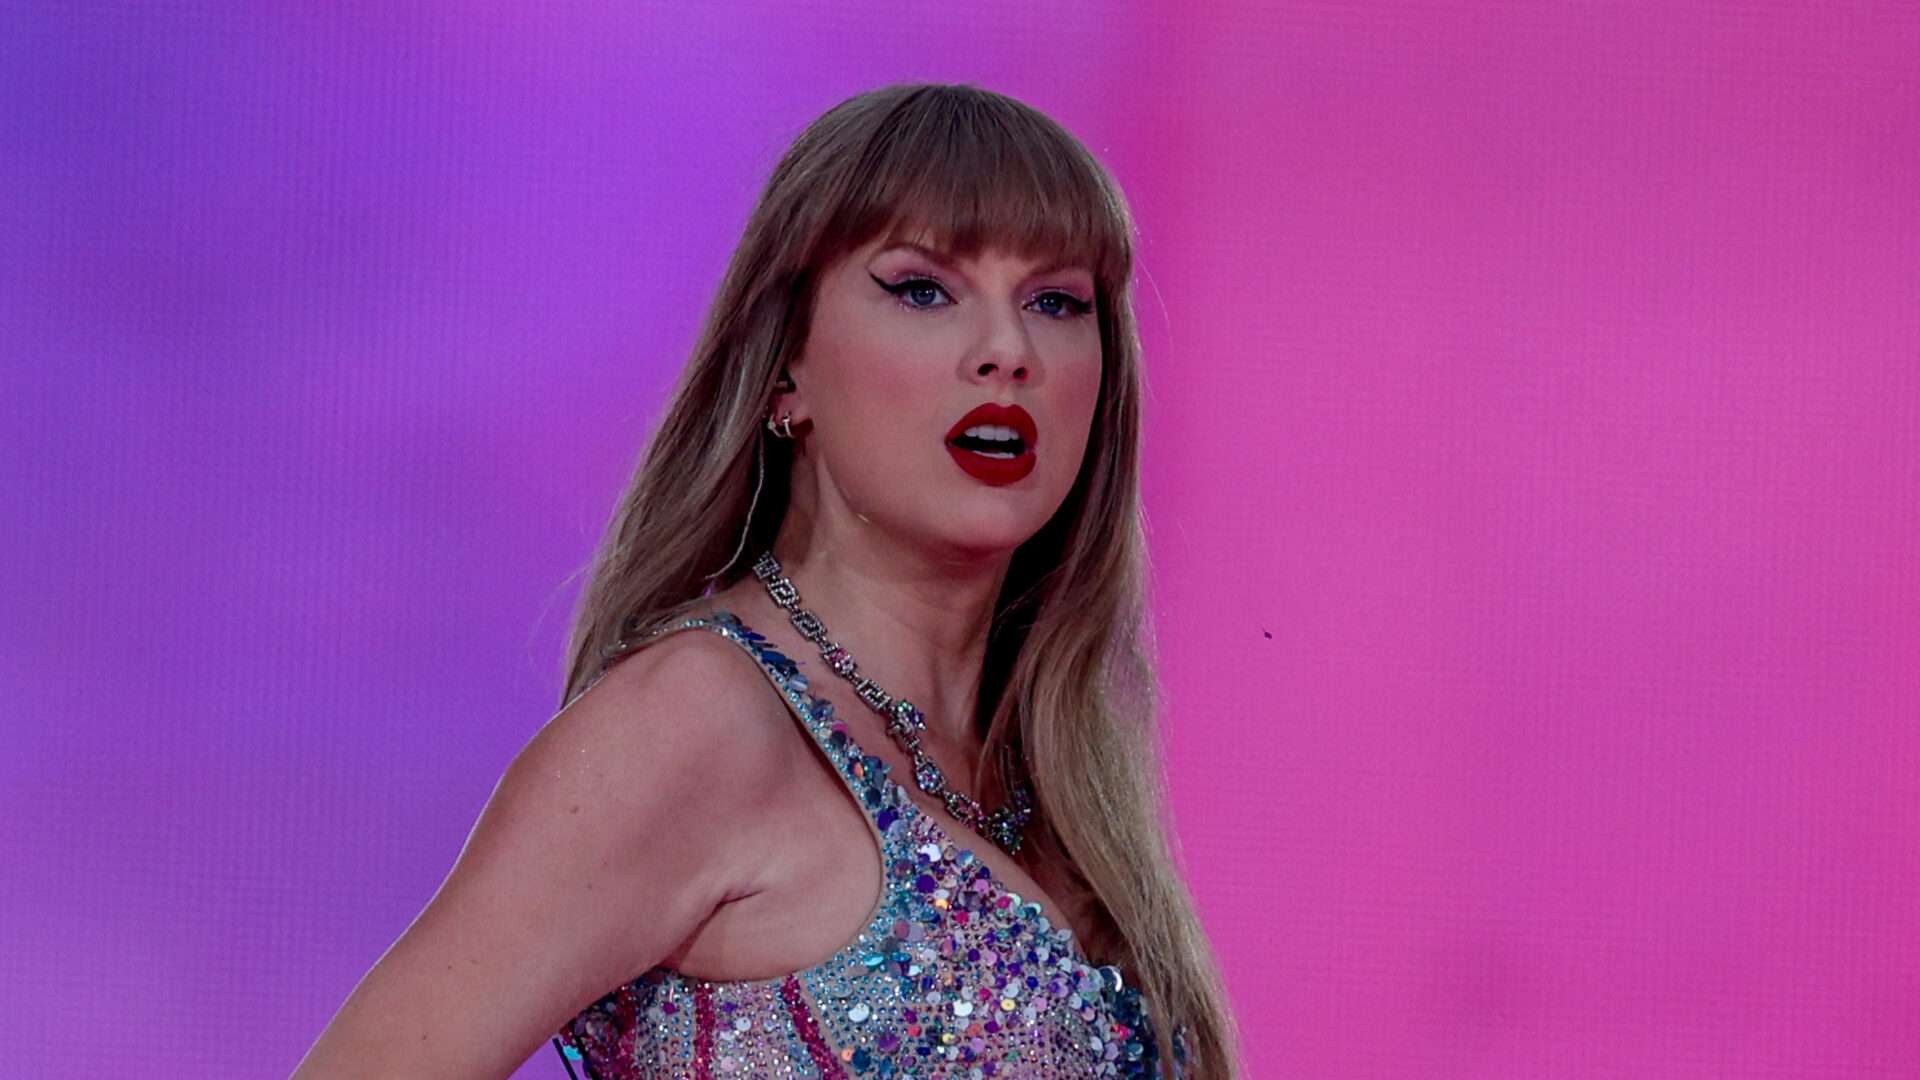 The Housing Policy Implications of Taylor Swift